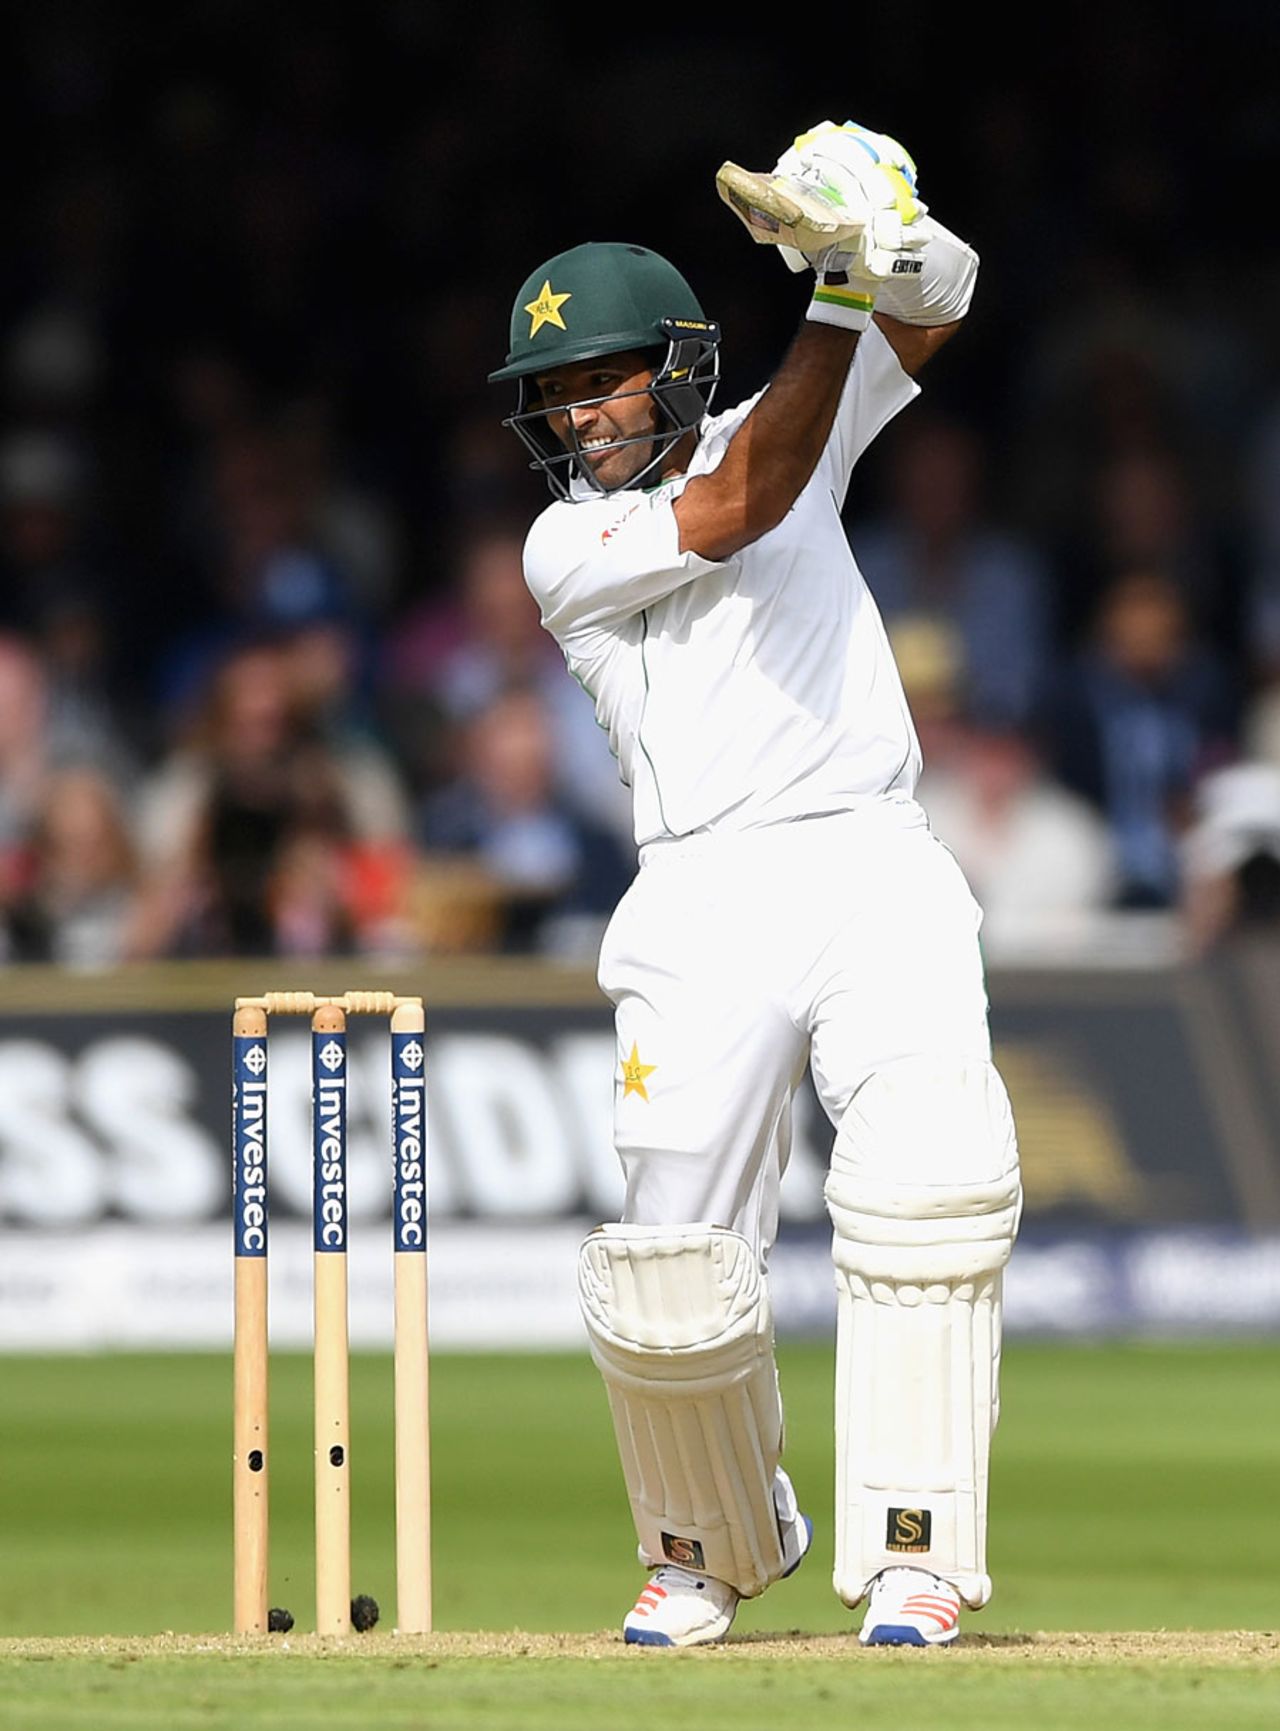 Asad Shafiq moved to an elegant half-century, England v Pakistan, 1st Investec Test, Lord's, 1st day, July 14, 2016